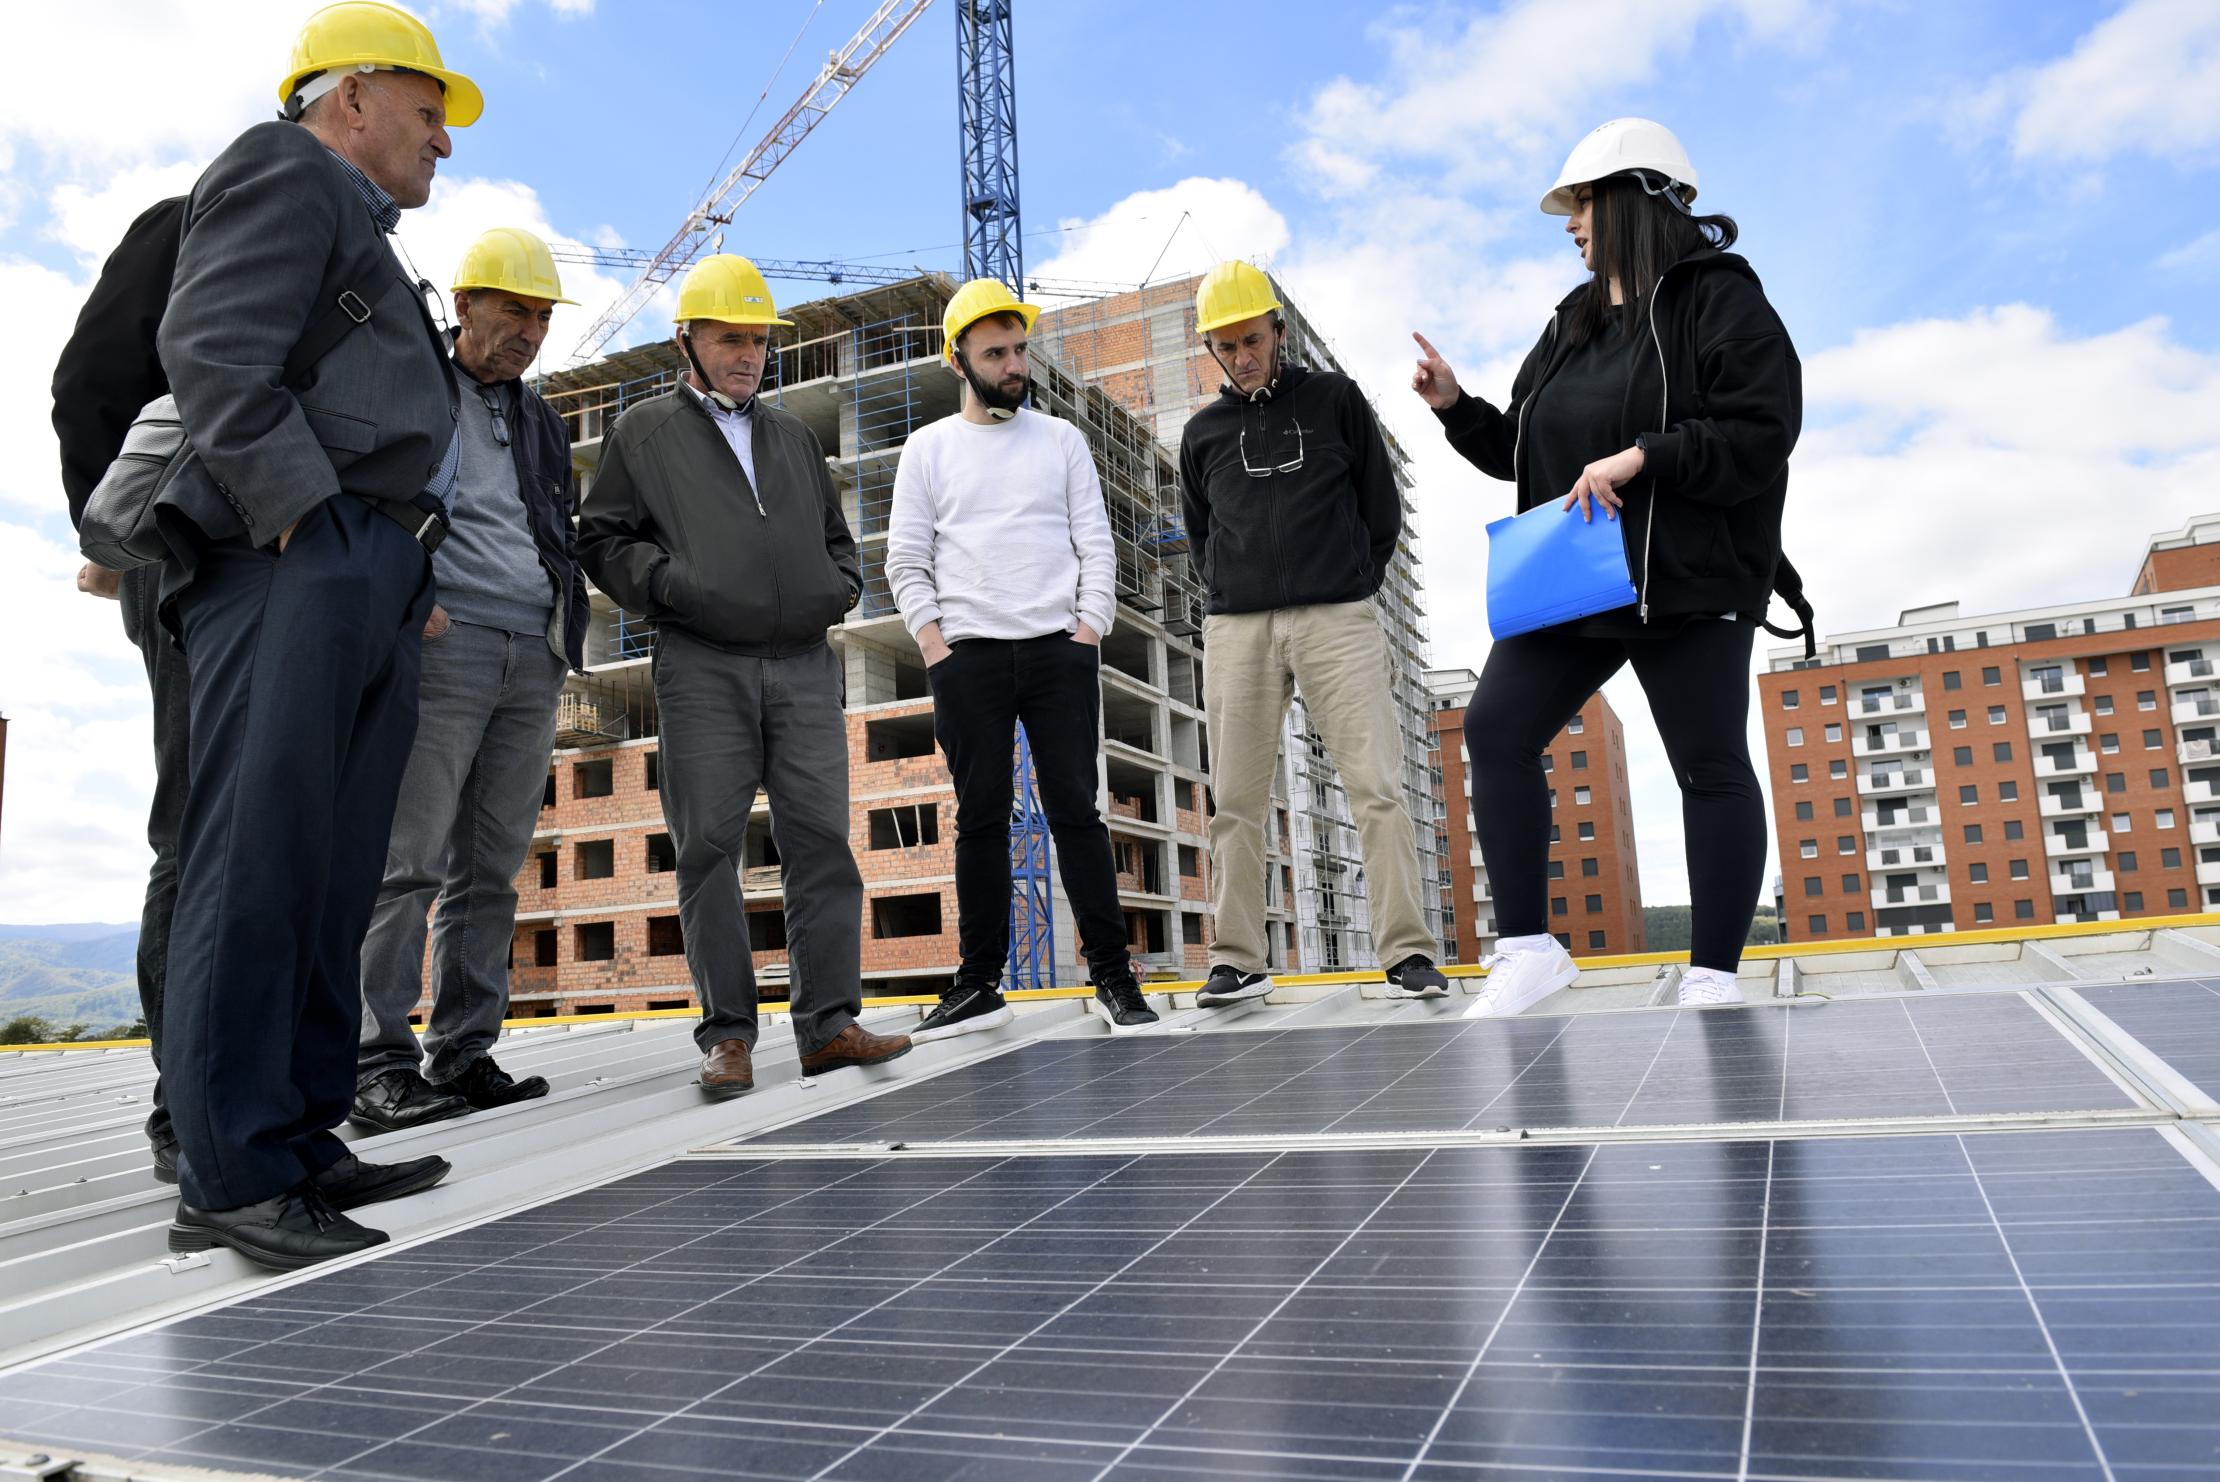 A group of workers being trained on installing solar panels in Kosovo*.